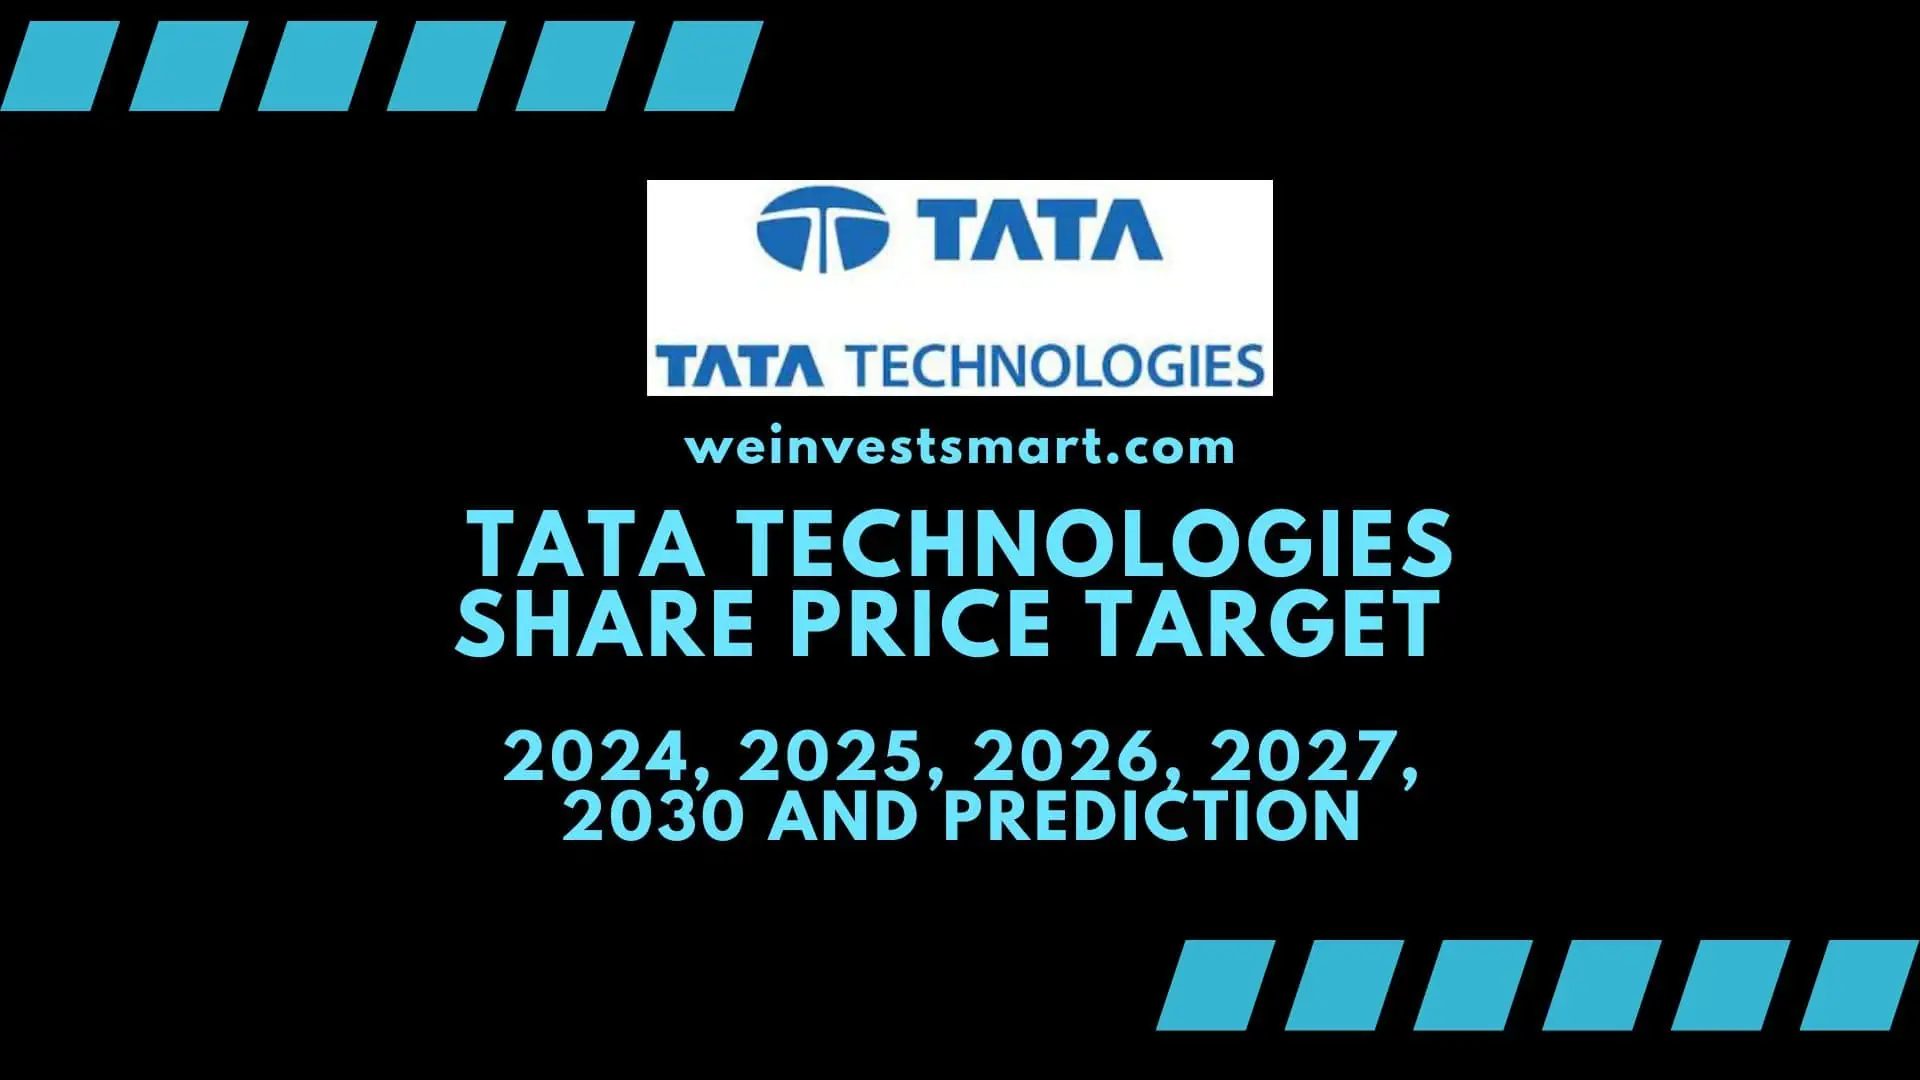 Tata Technologies share price target 2024, 2025, 2026, 2027, 2030 and Prediction